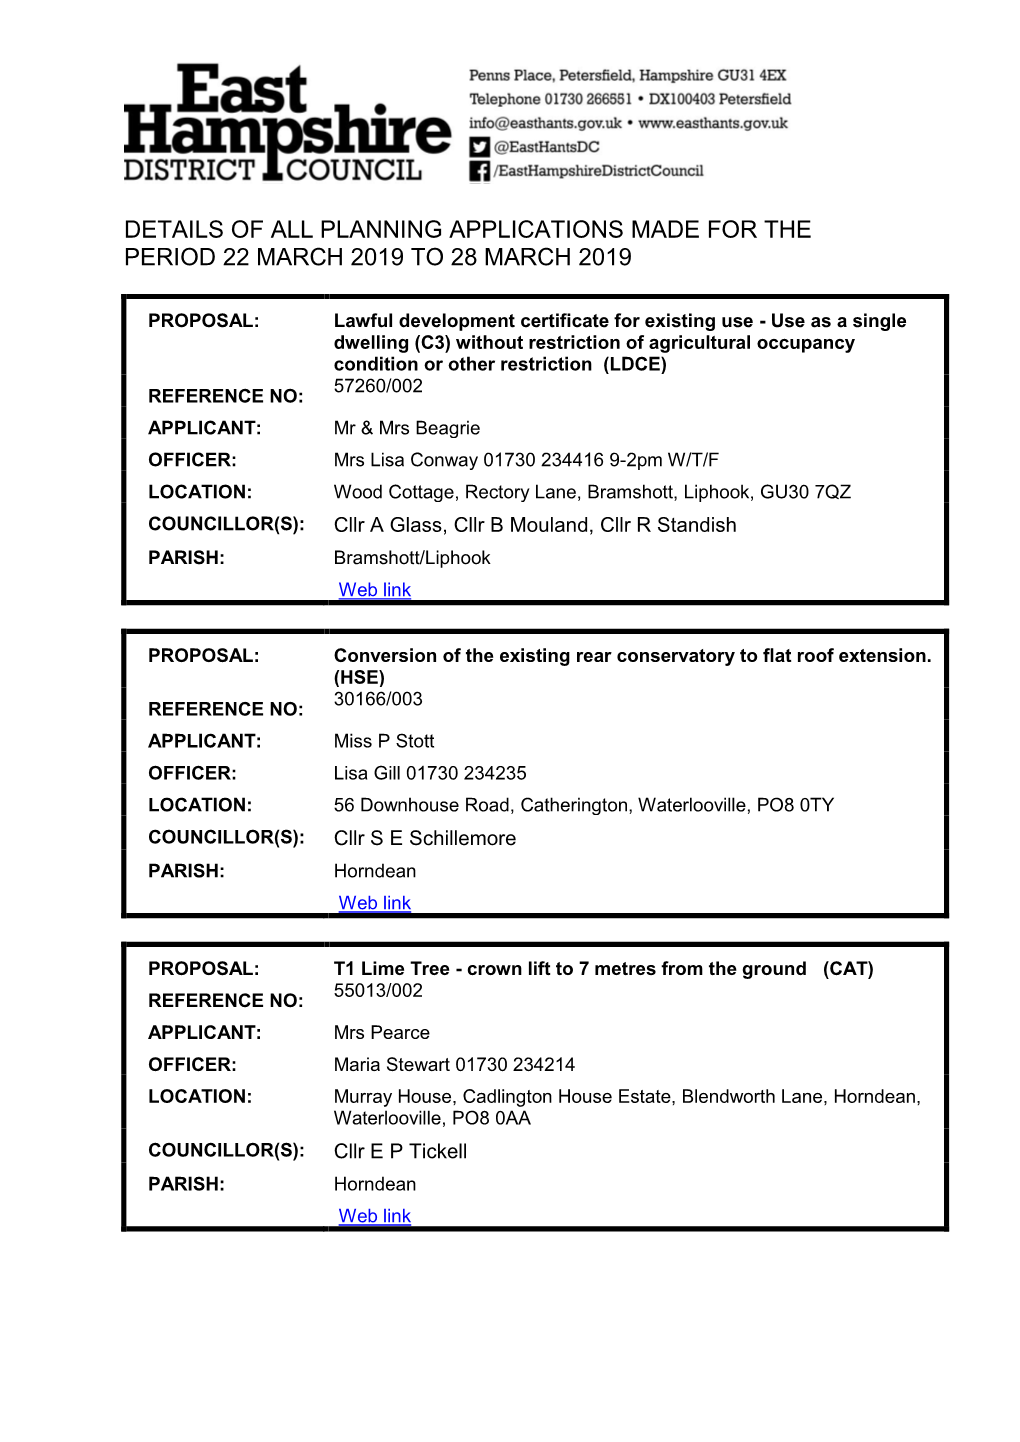 Details of All Planning Applications Made for the Period 22 March 2019 to 28 March 2019